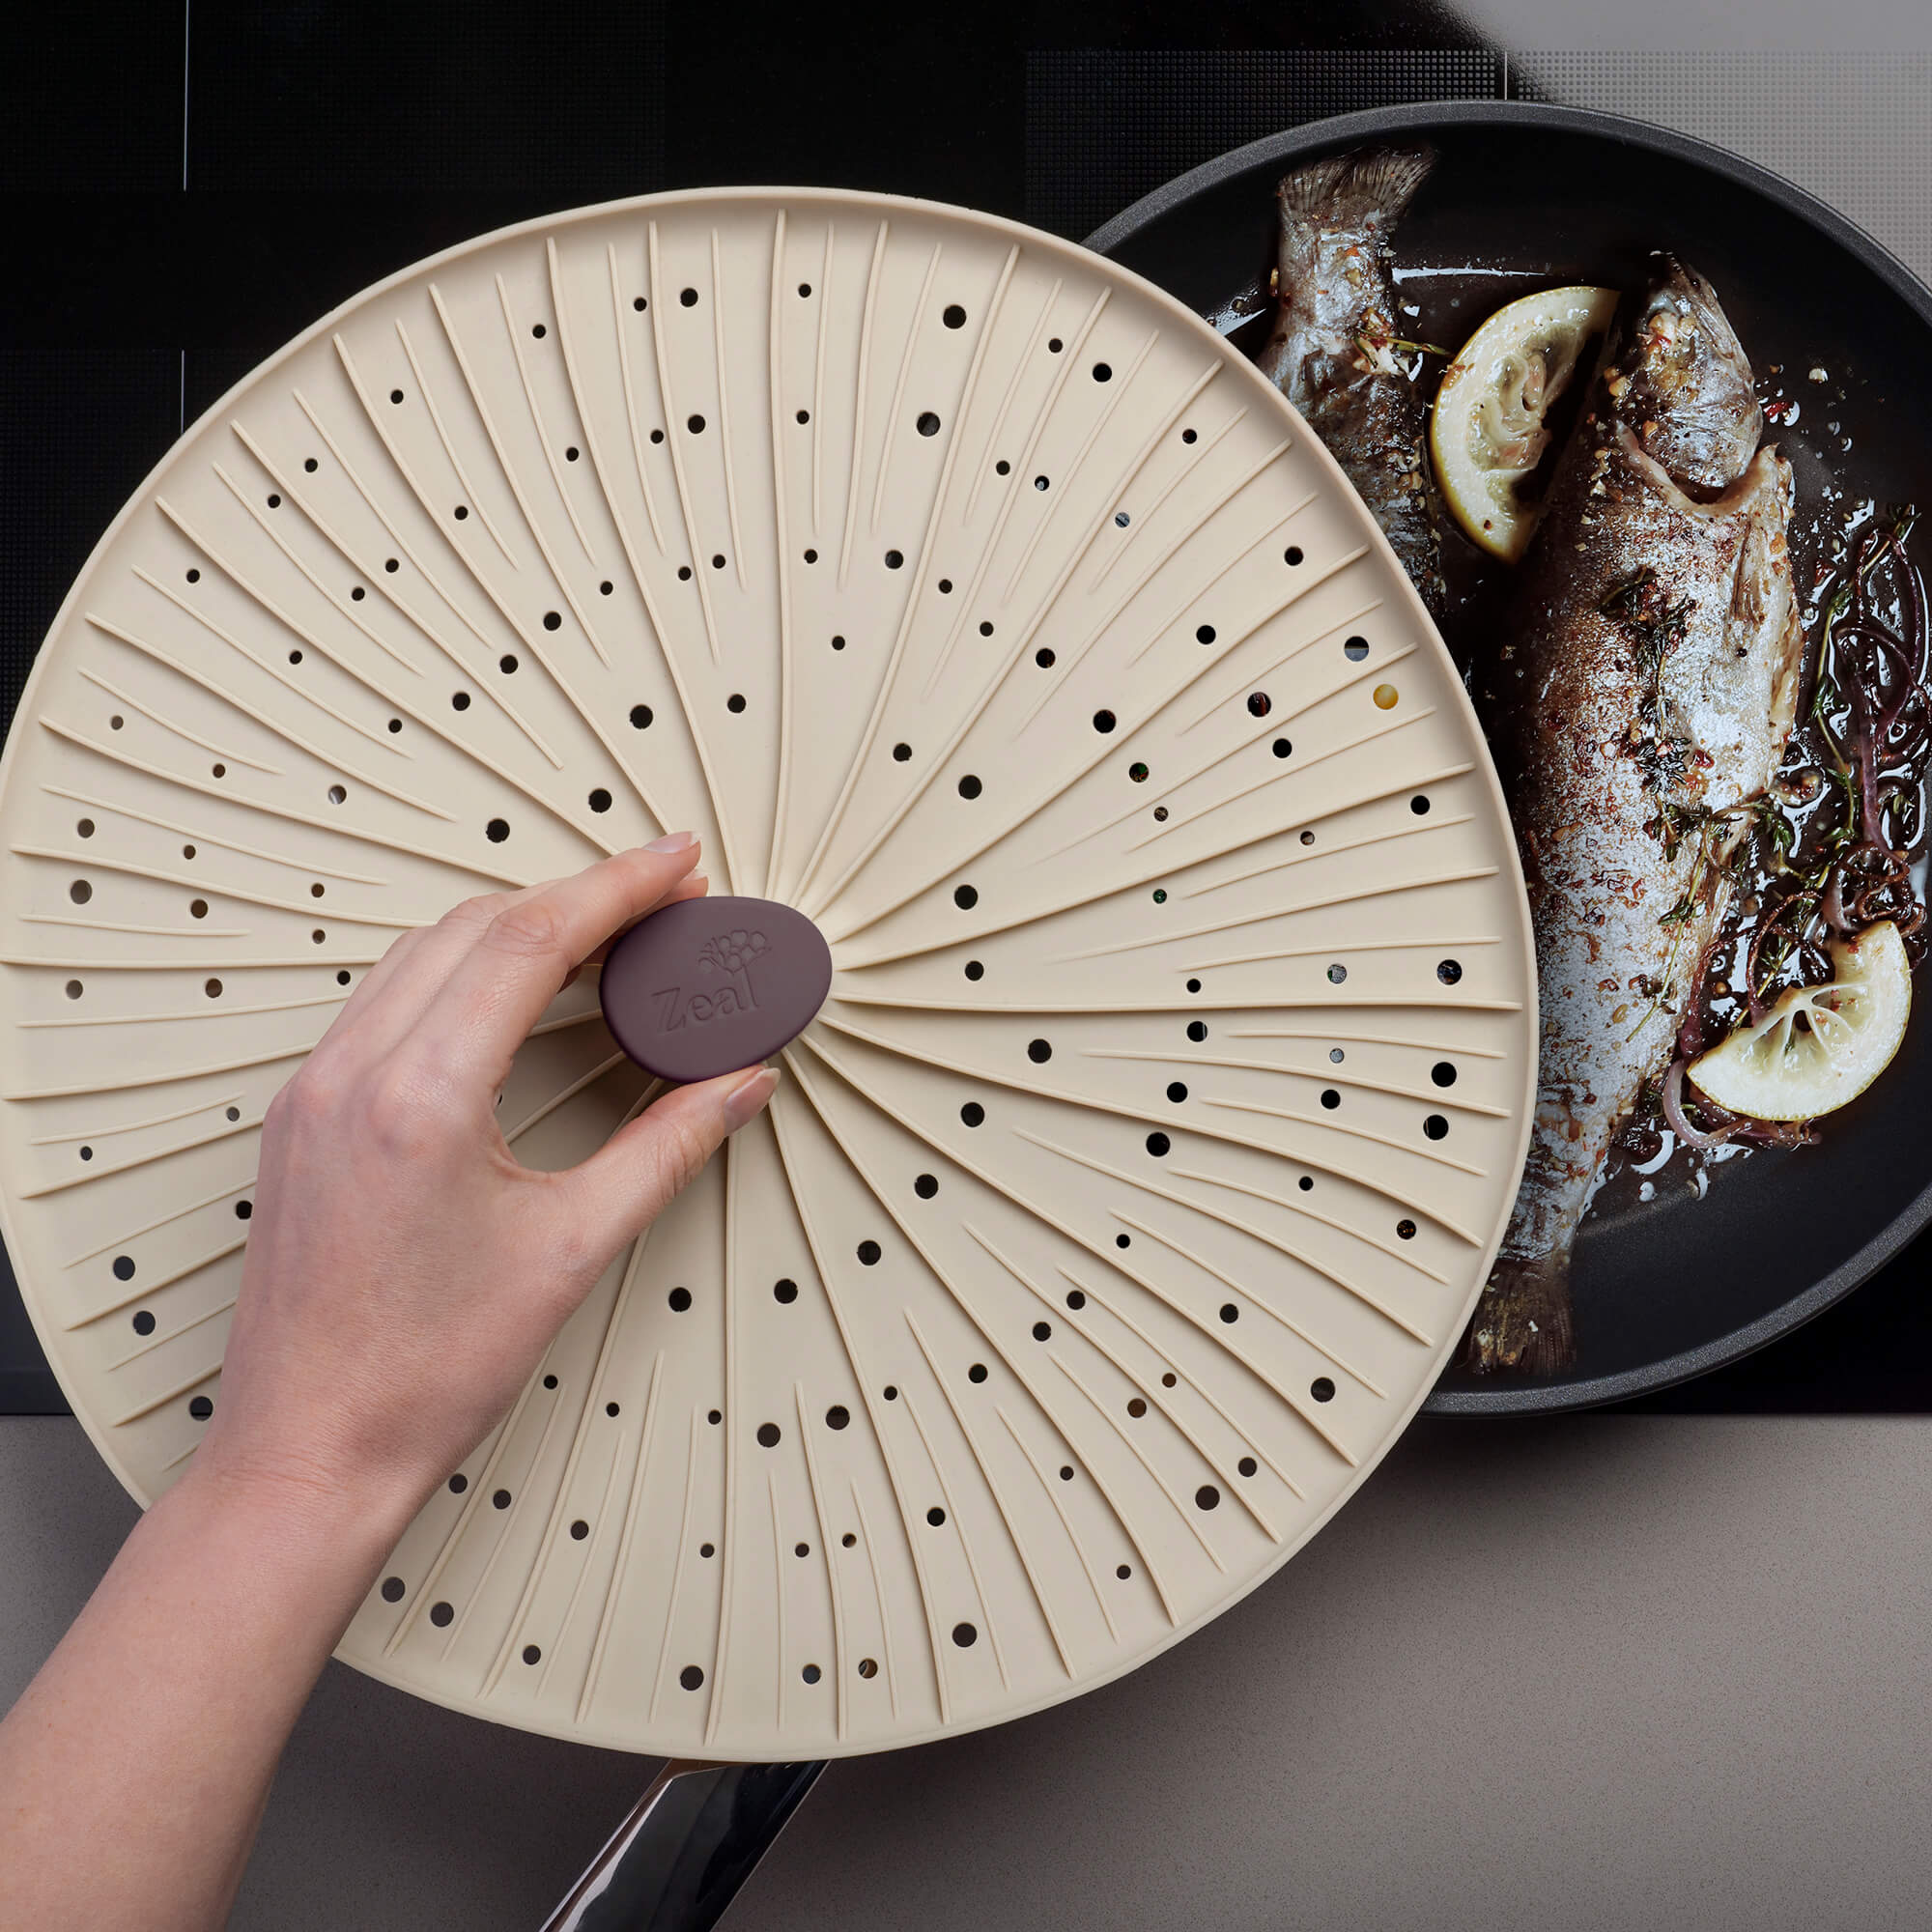 Zeal Mushroom Silicone Splatter Guard in use cooking fish